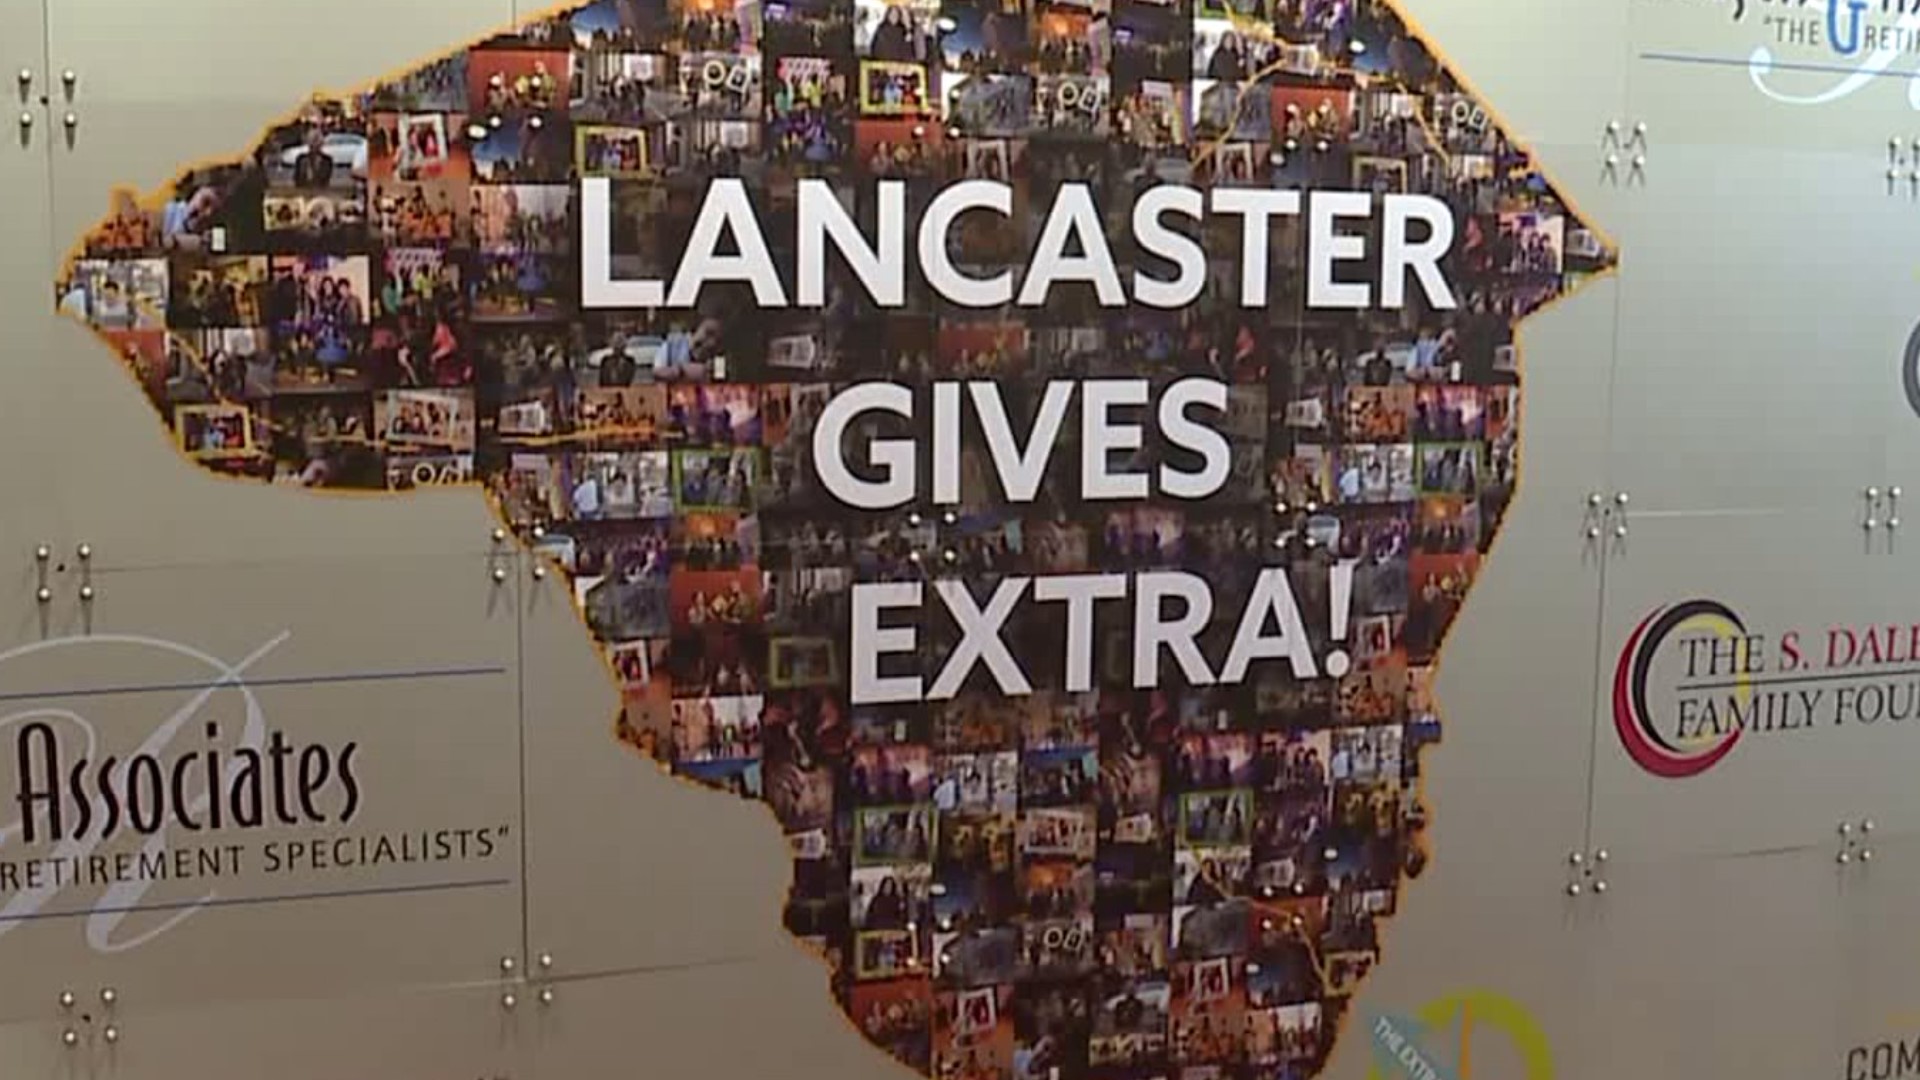 On Friday, Nov. 18 Lancaster's Extraordinary Give will kick off. The event highlights hundreds of non-profit organizations.